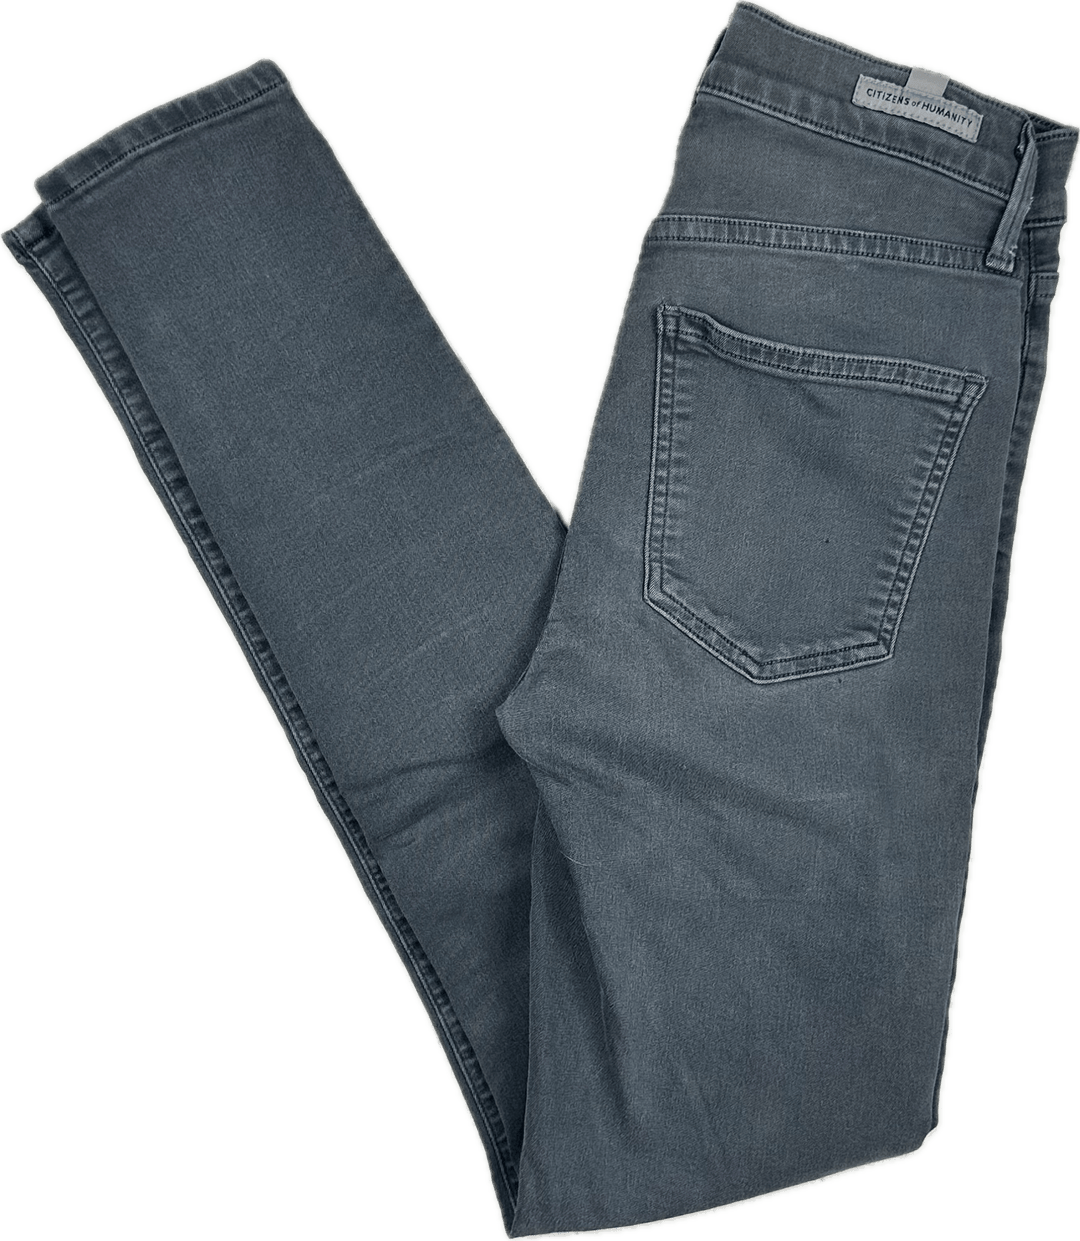 Citizens of Humanity 'Rocket' High Rise Skinny Grey Jeans - Size 25 - Jean Pool